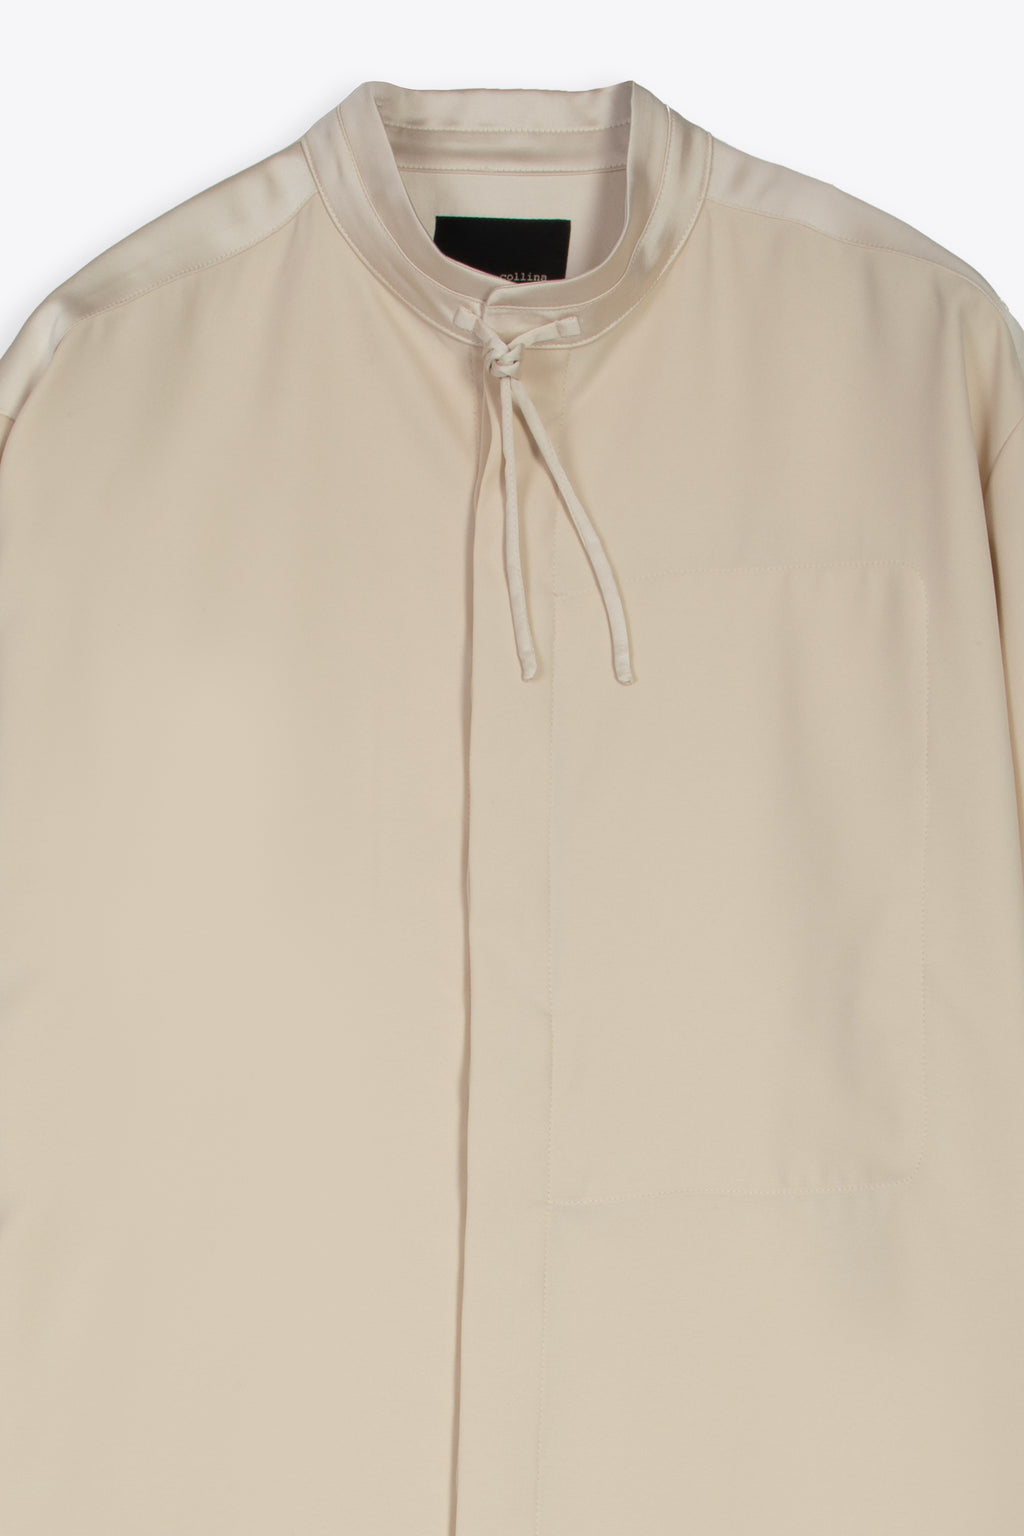 alt-image__Champagne-coloured-satin-korean-shirt-with-long-sleeves-